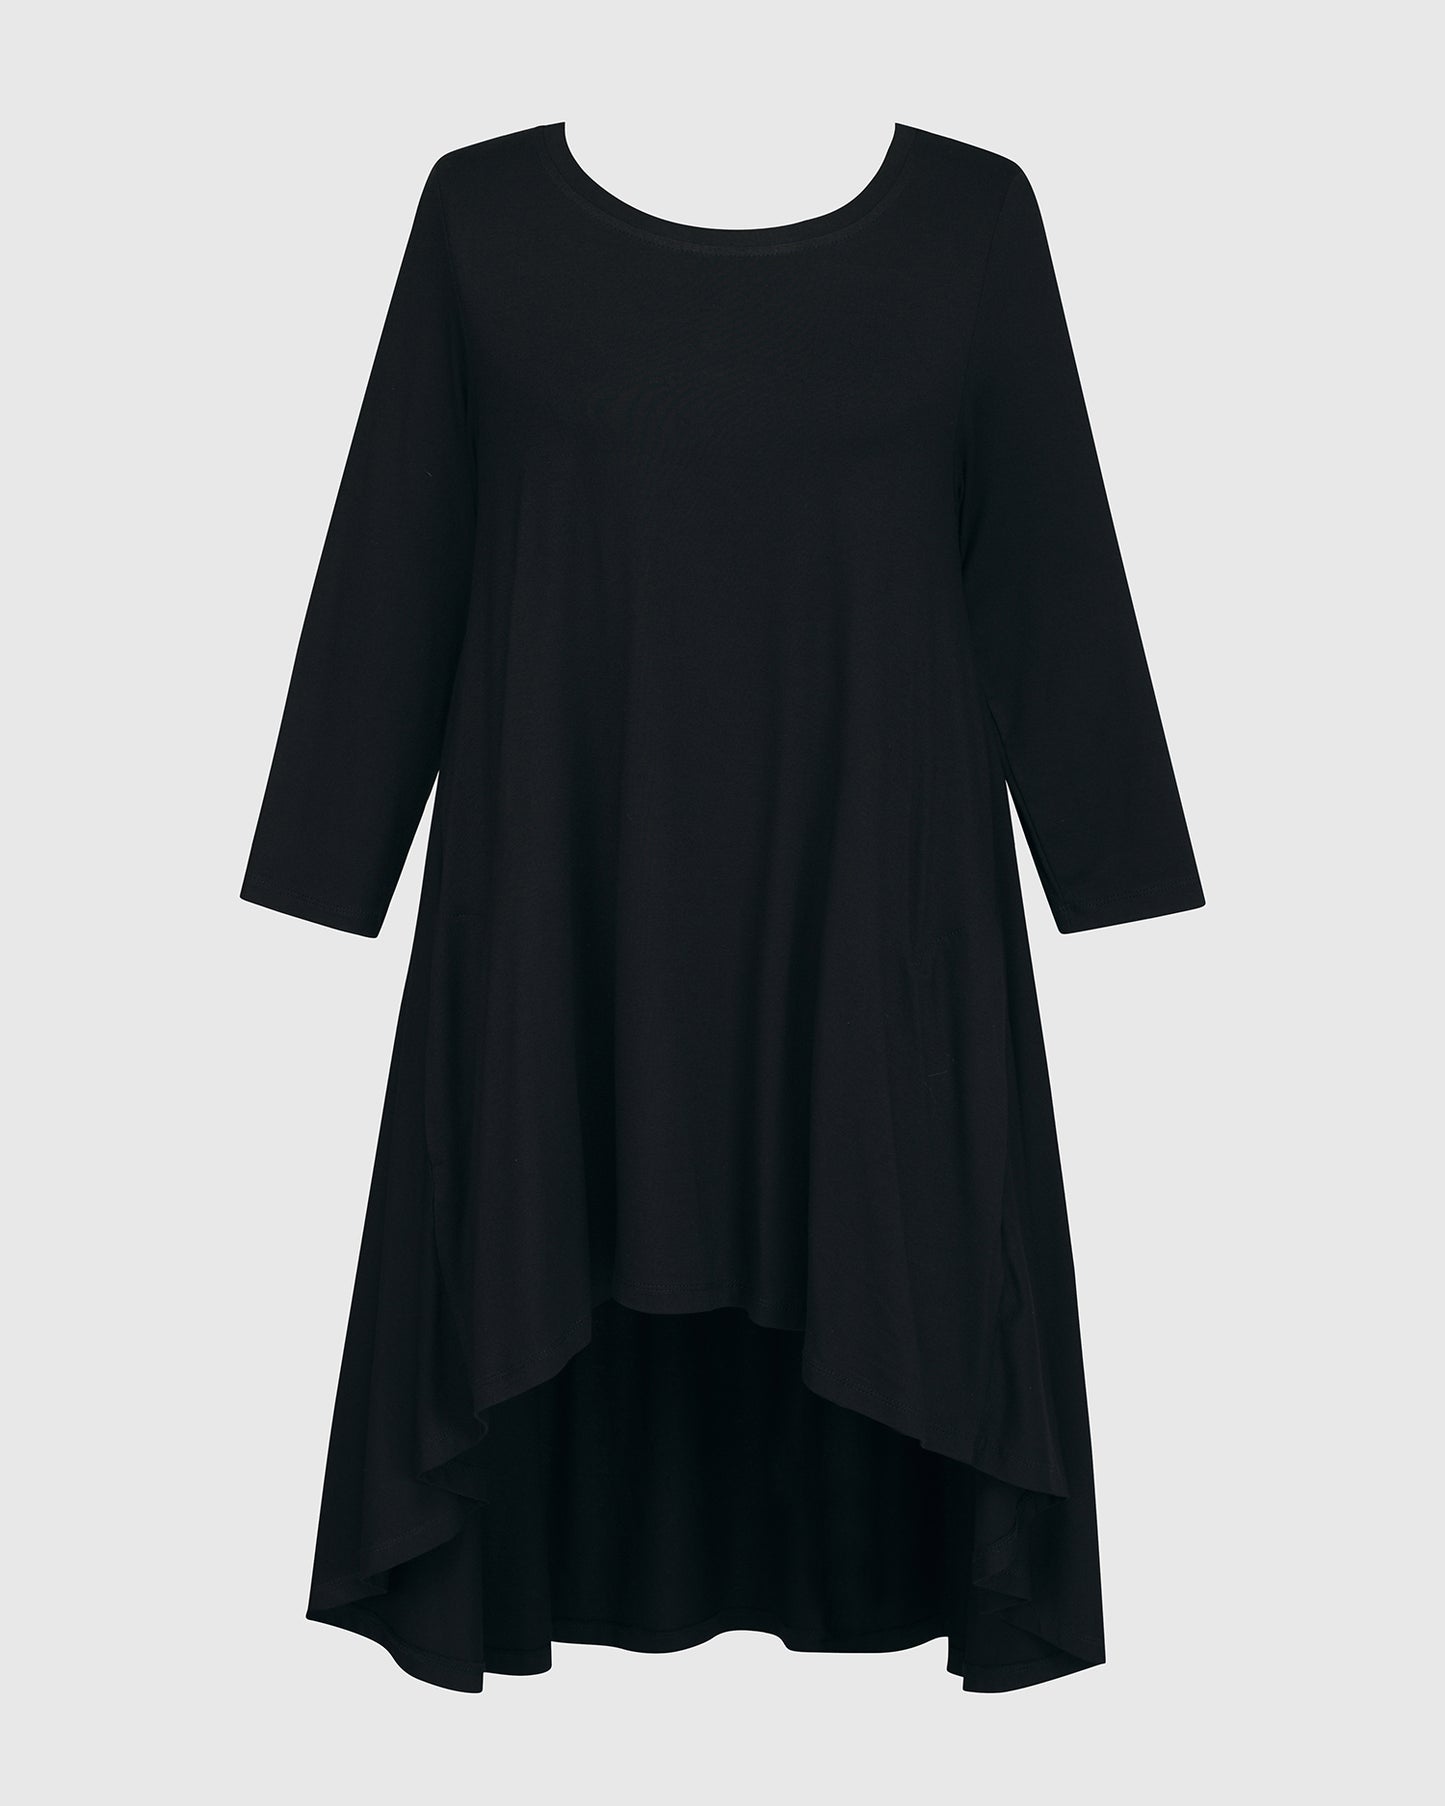 Essential Swing Tunic Top, Black by Alembika